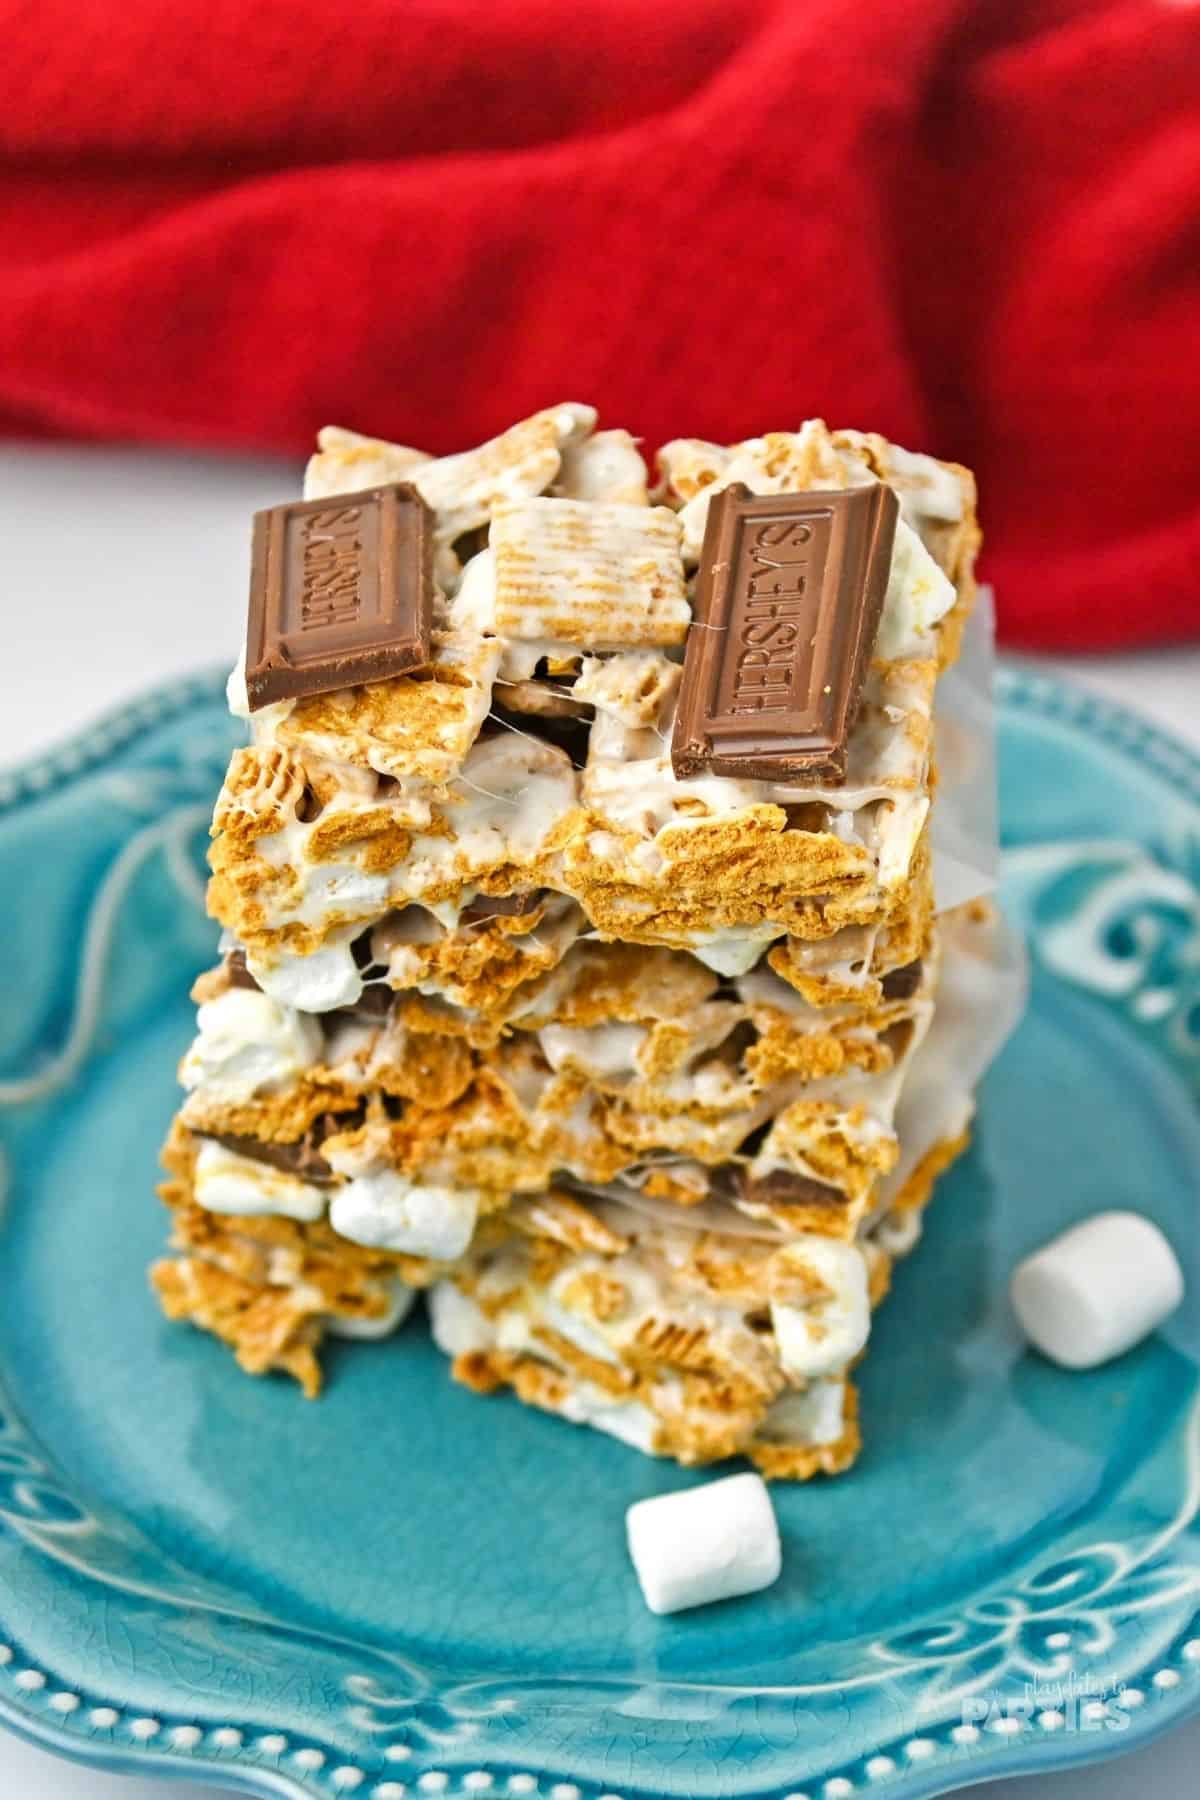 Three S'mores treats are stacked on a blue plate with marshmallows scattered nearby.